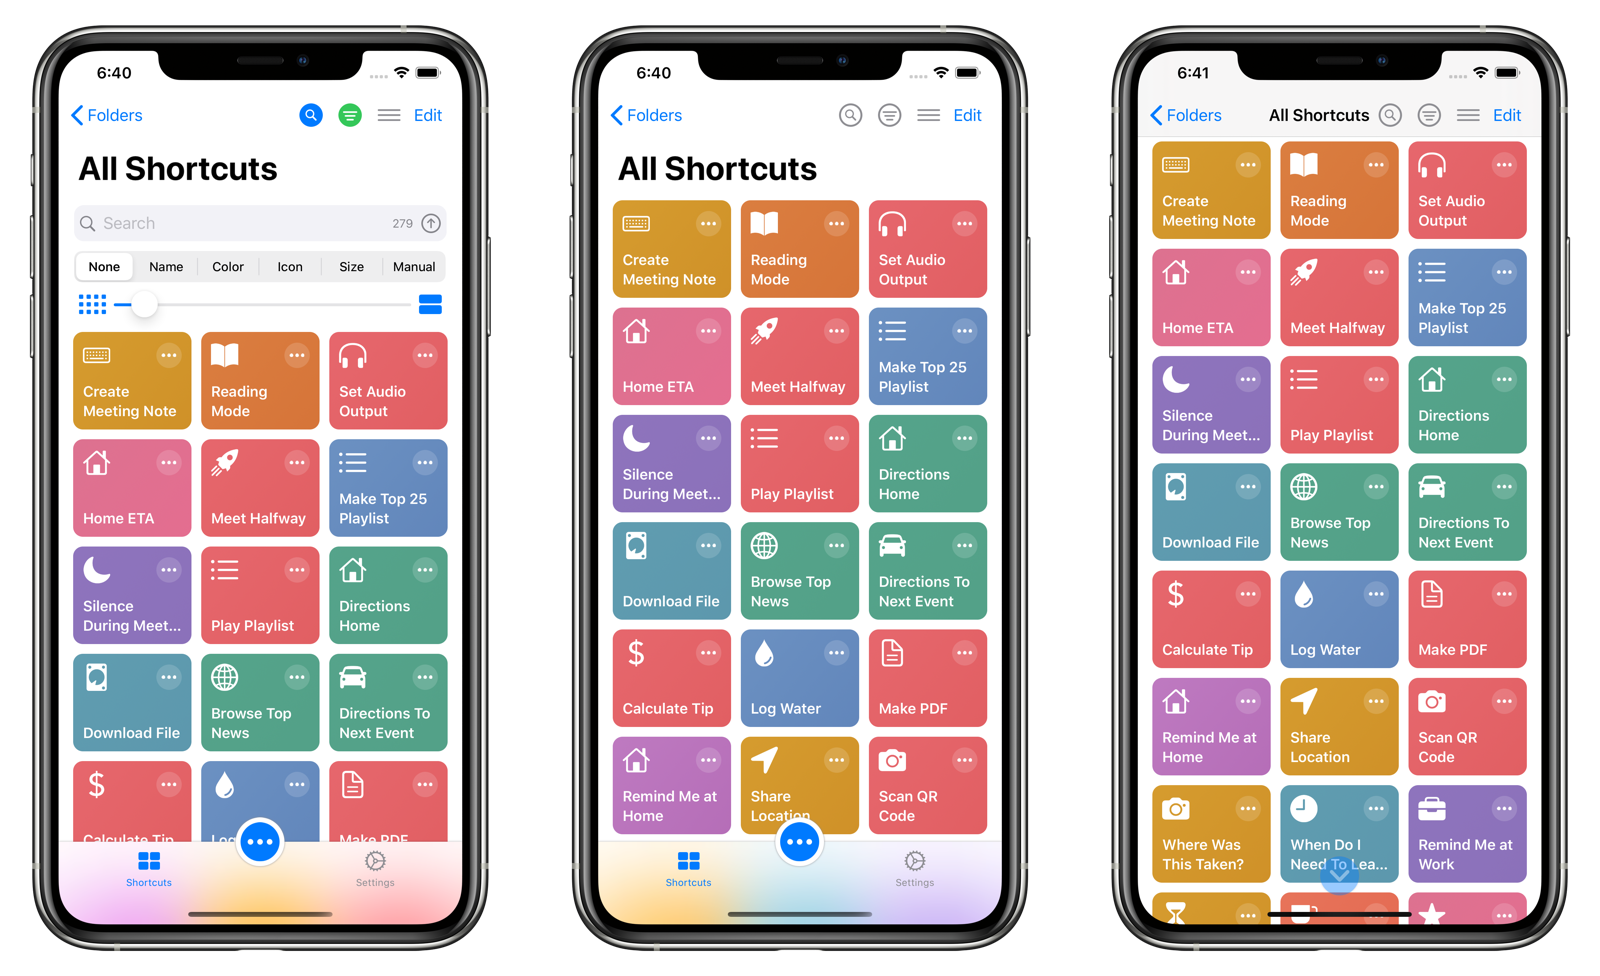 Maximizing screen real estate for the Shortcuts View